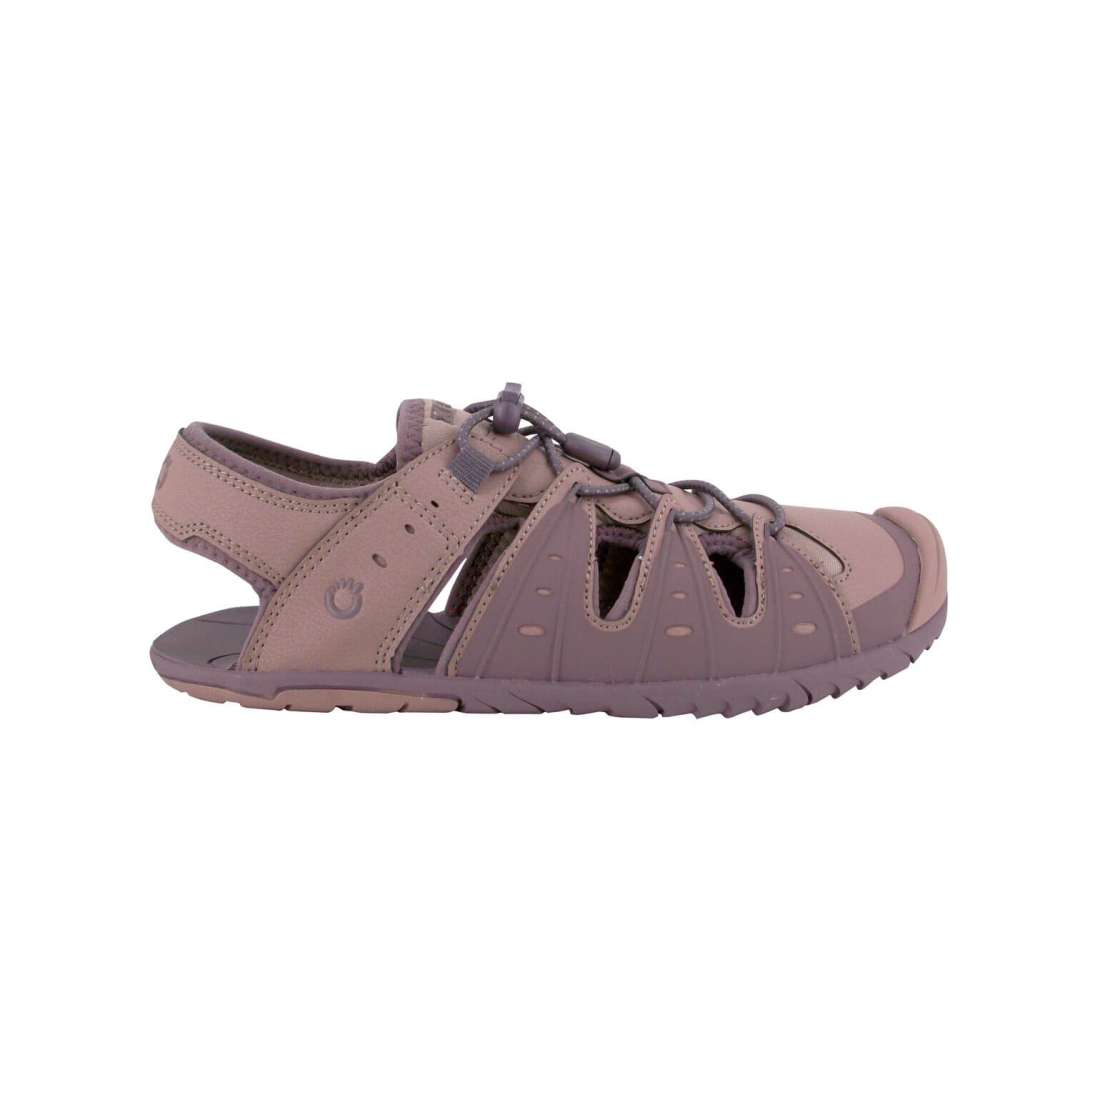 Xero Shoes Colorado Women Minimalist Shoes For On Road And Light Trail